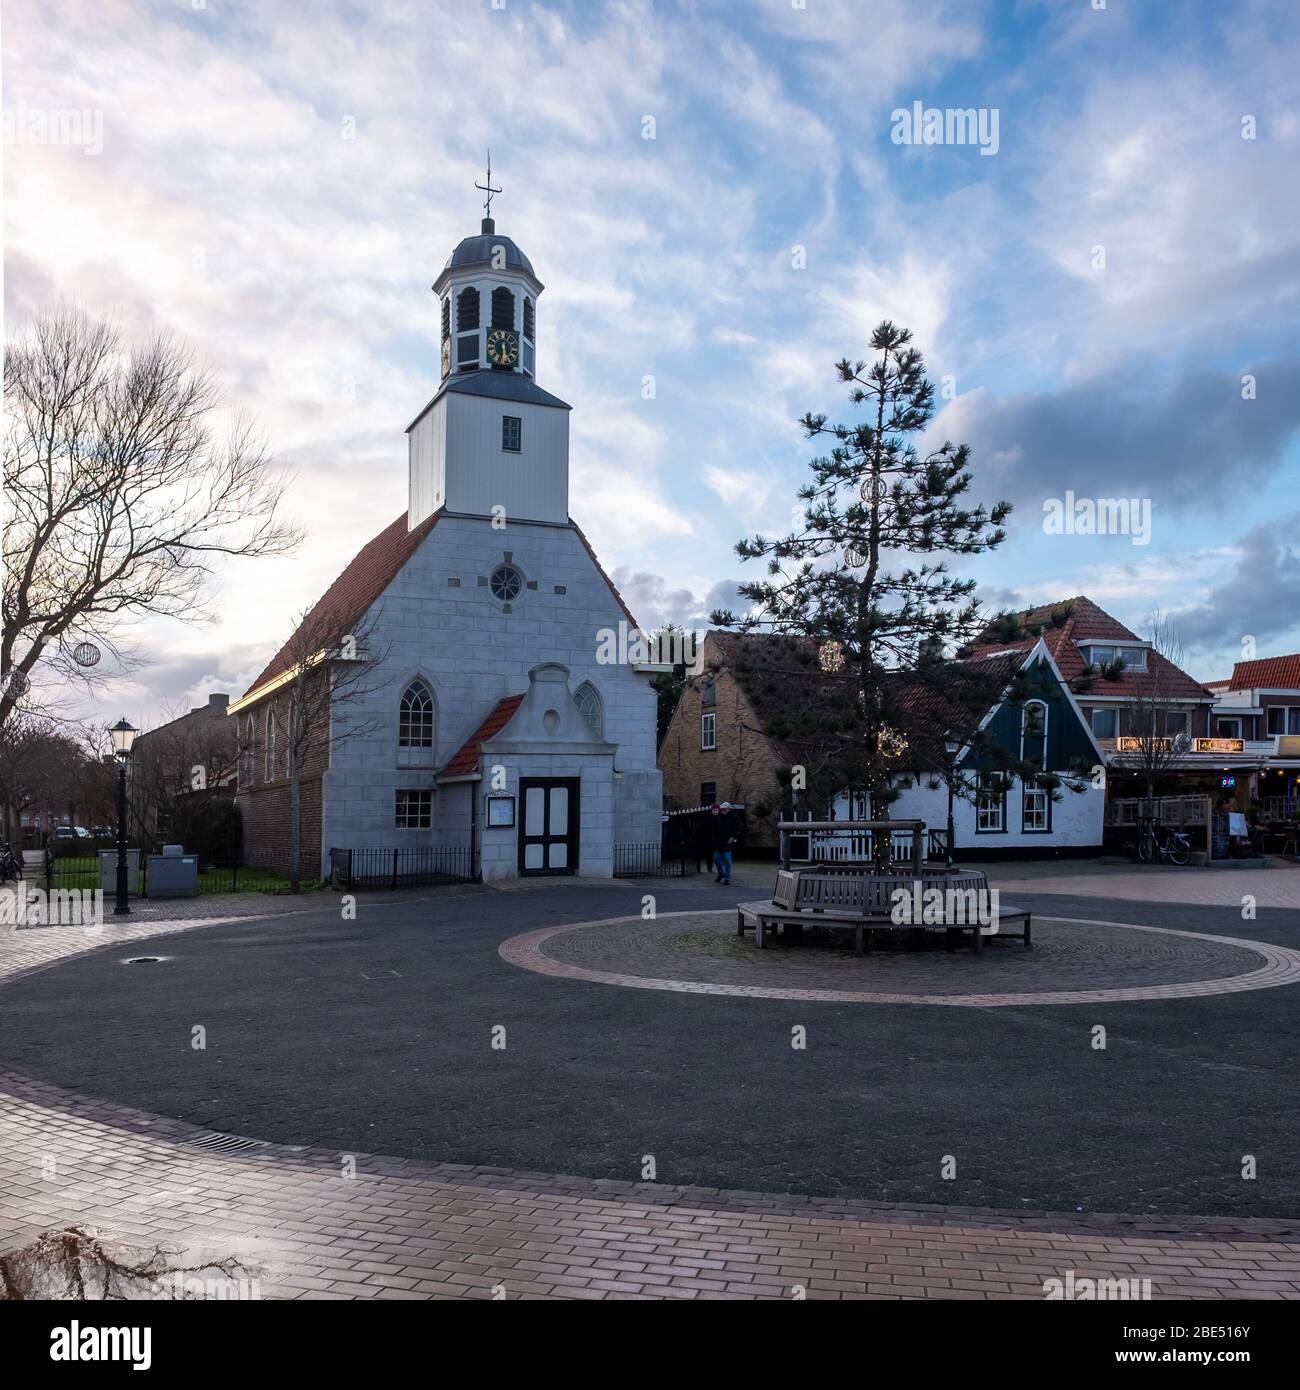 De Koog,  Netherlands - 25 February 2020:  view on the church of the  tourist village of De Koog, located on the island of Texel. Stock Photo